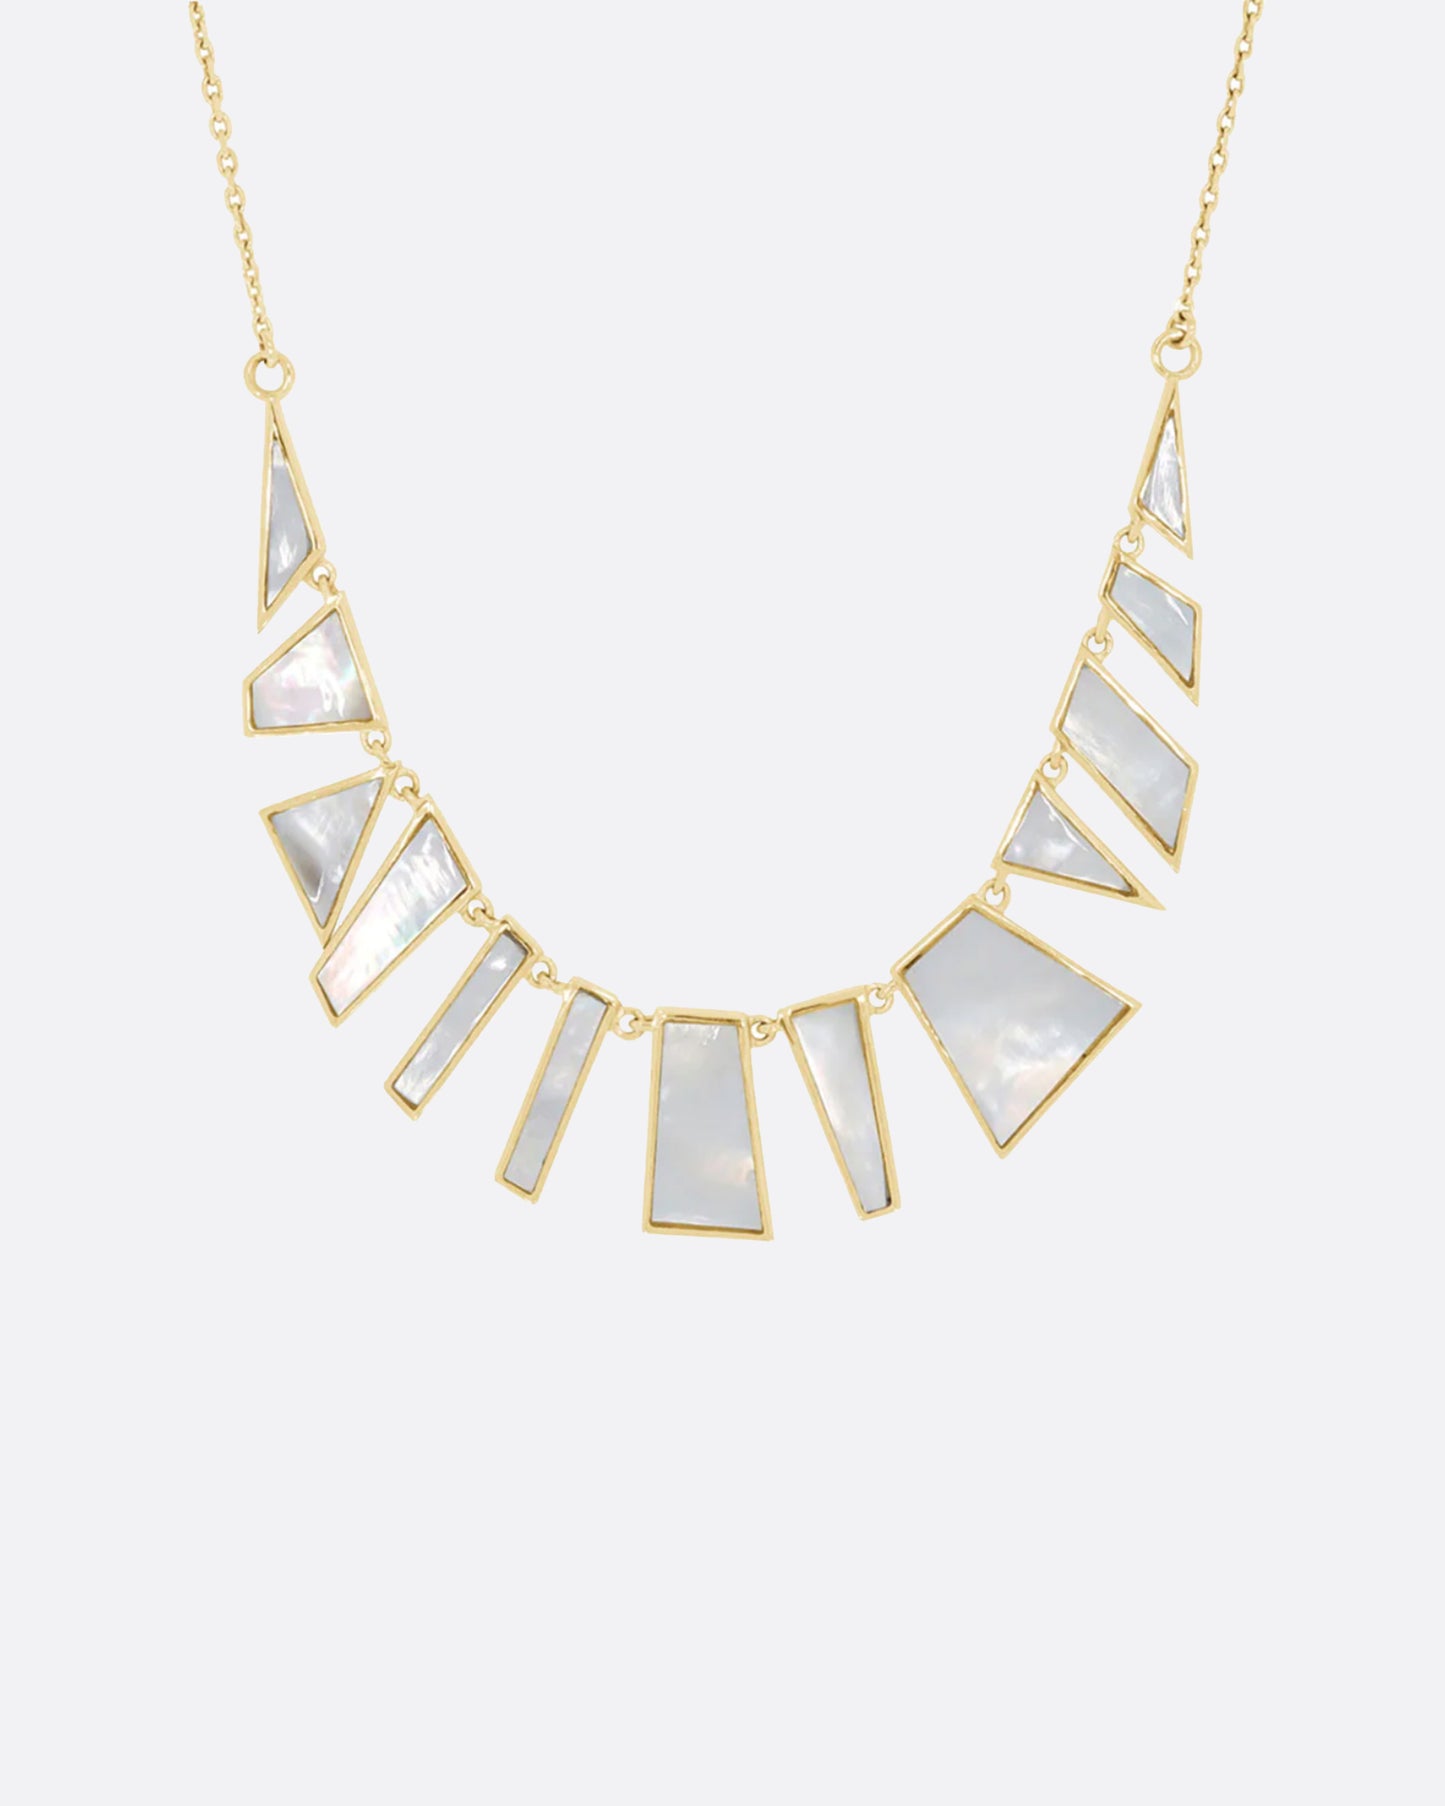 Inspired by a pair of earrings found while on vacation, this necklace reflects light with its iridescent white sections.